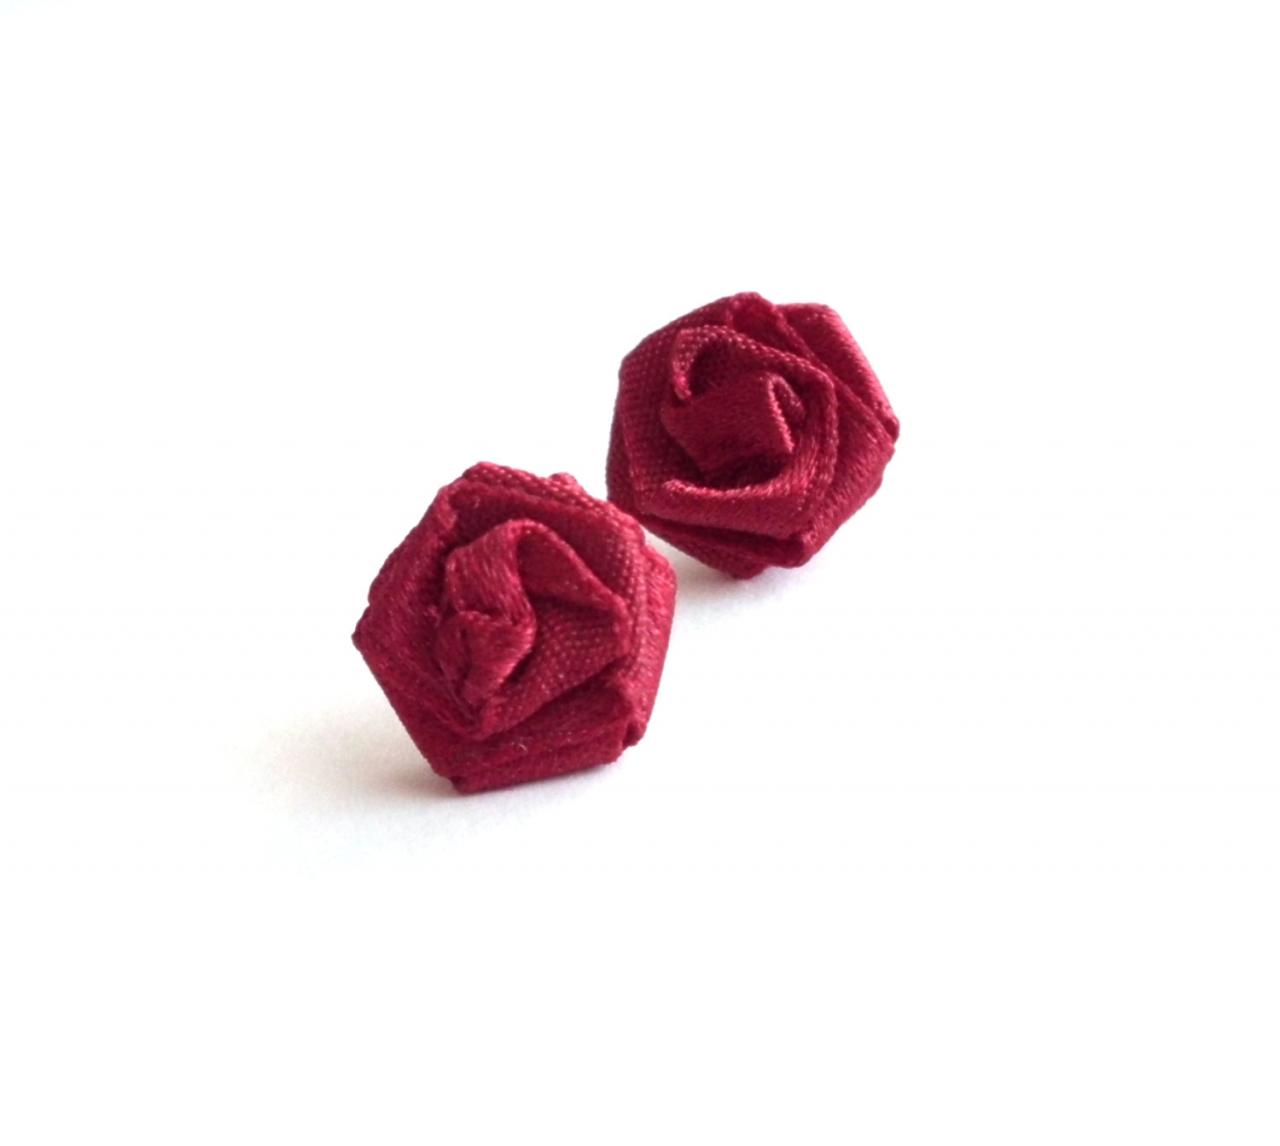 Red Rose Stud Earrings Recycled Fabric Textile Jewellery Repurposed Cloth Applique Flowers Scarlet Ear Studs Upcycled Jewelry